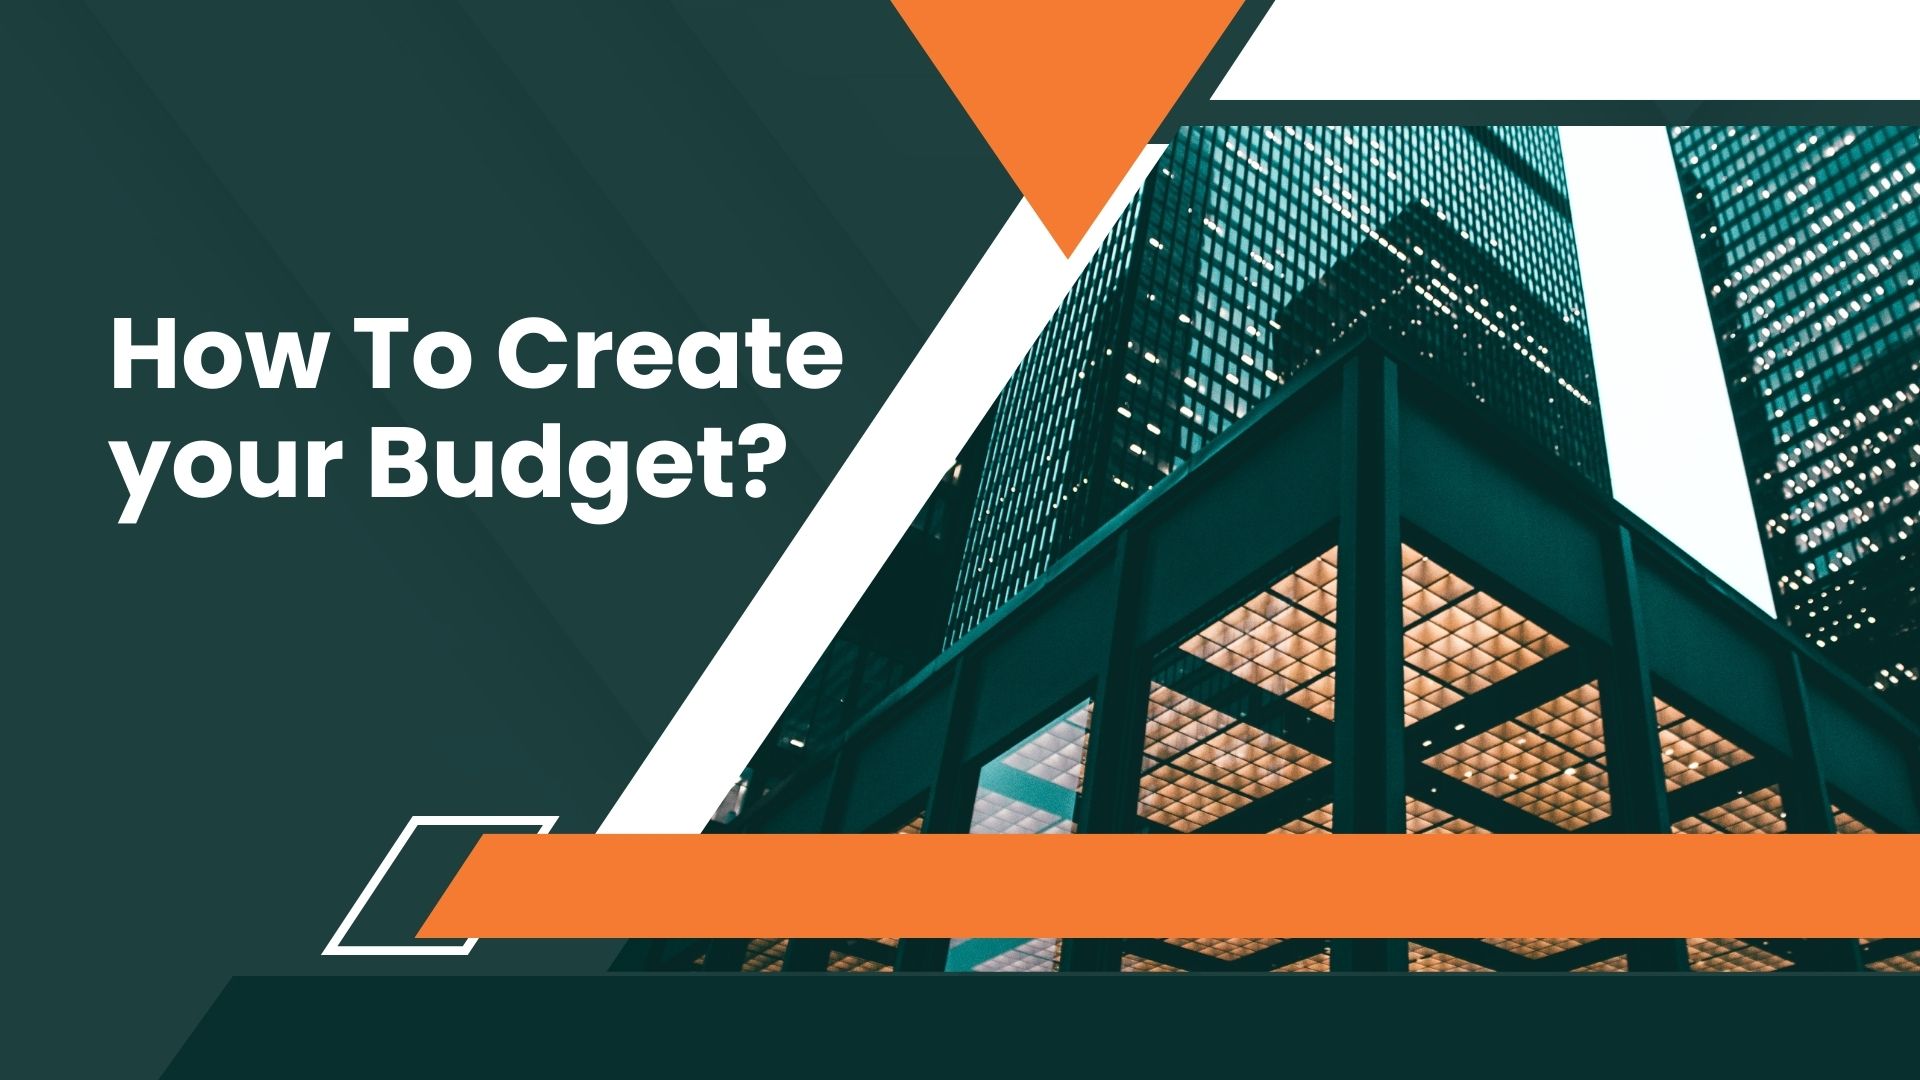 How To Create your Budget